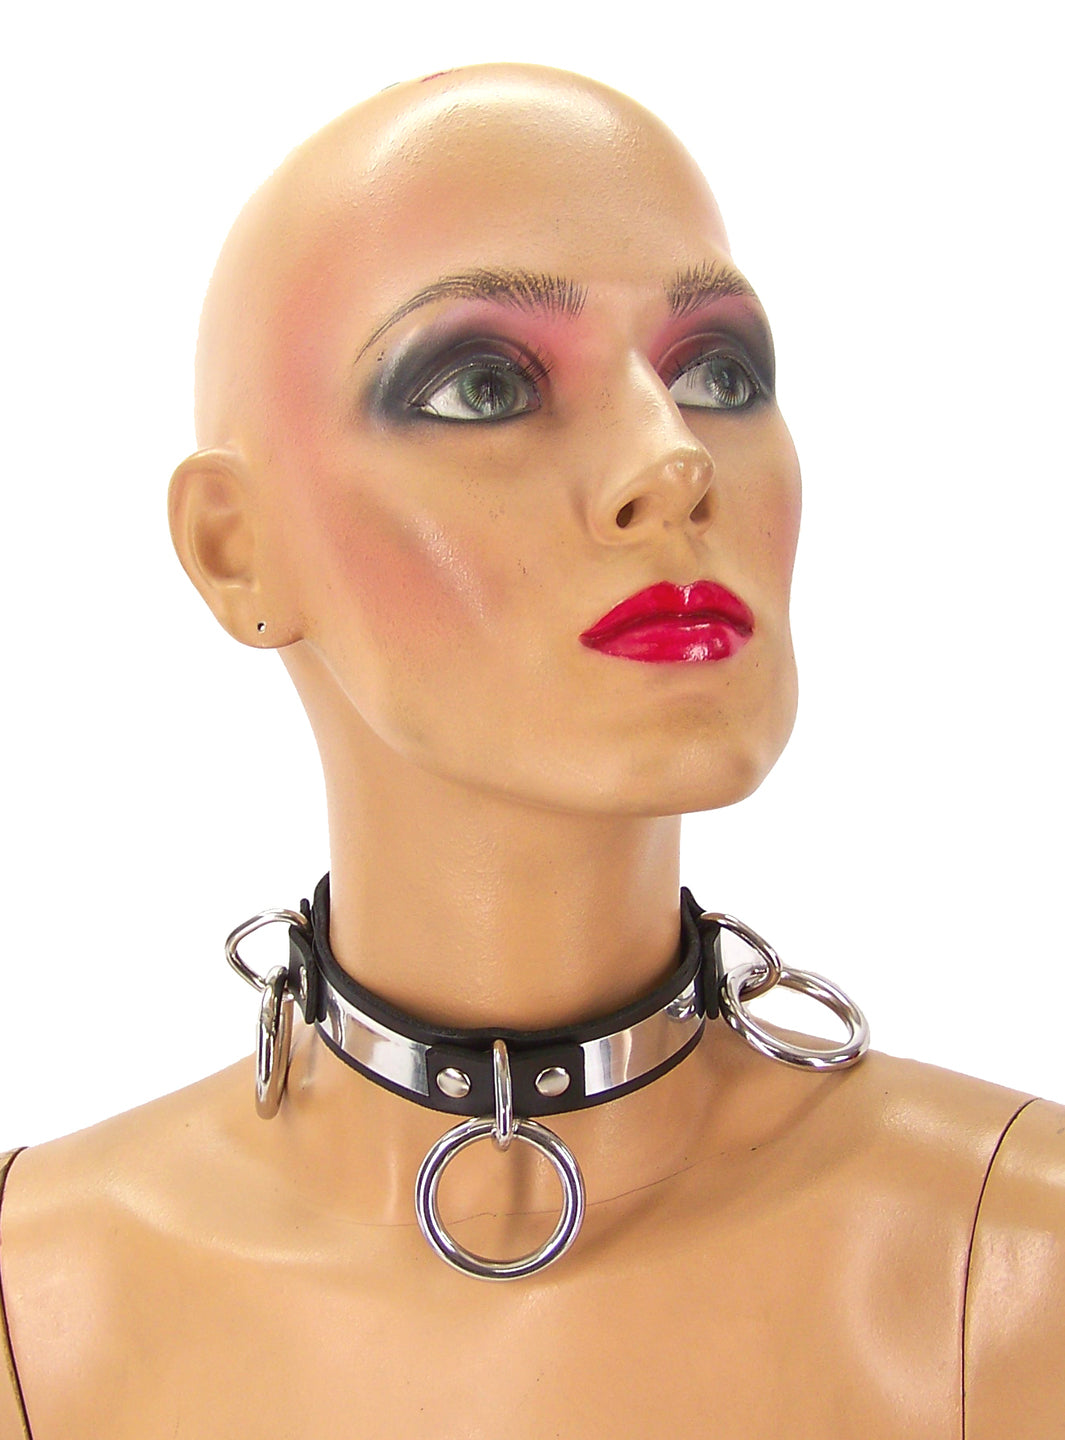 The front view of a mannequin head wearing the Leather Triple Ring Metal Band Bondage Collar.